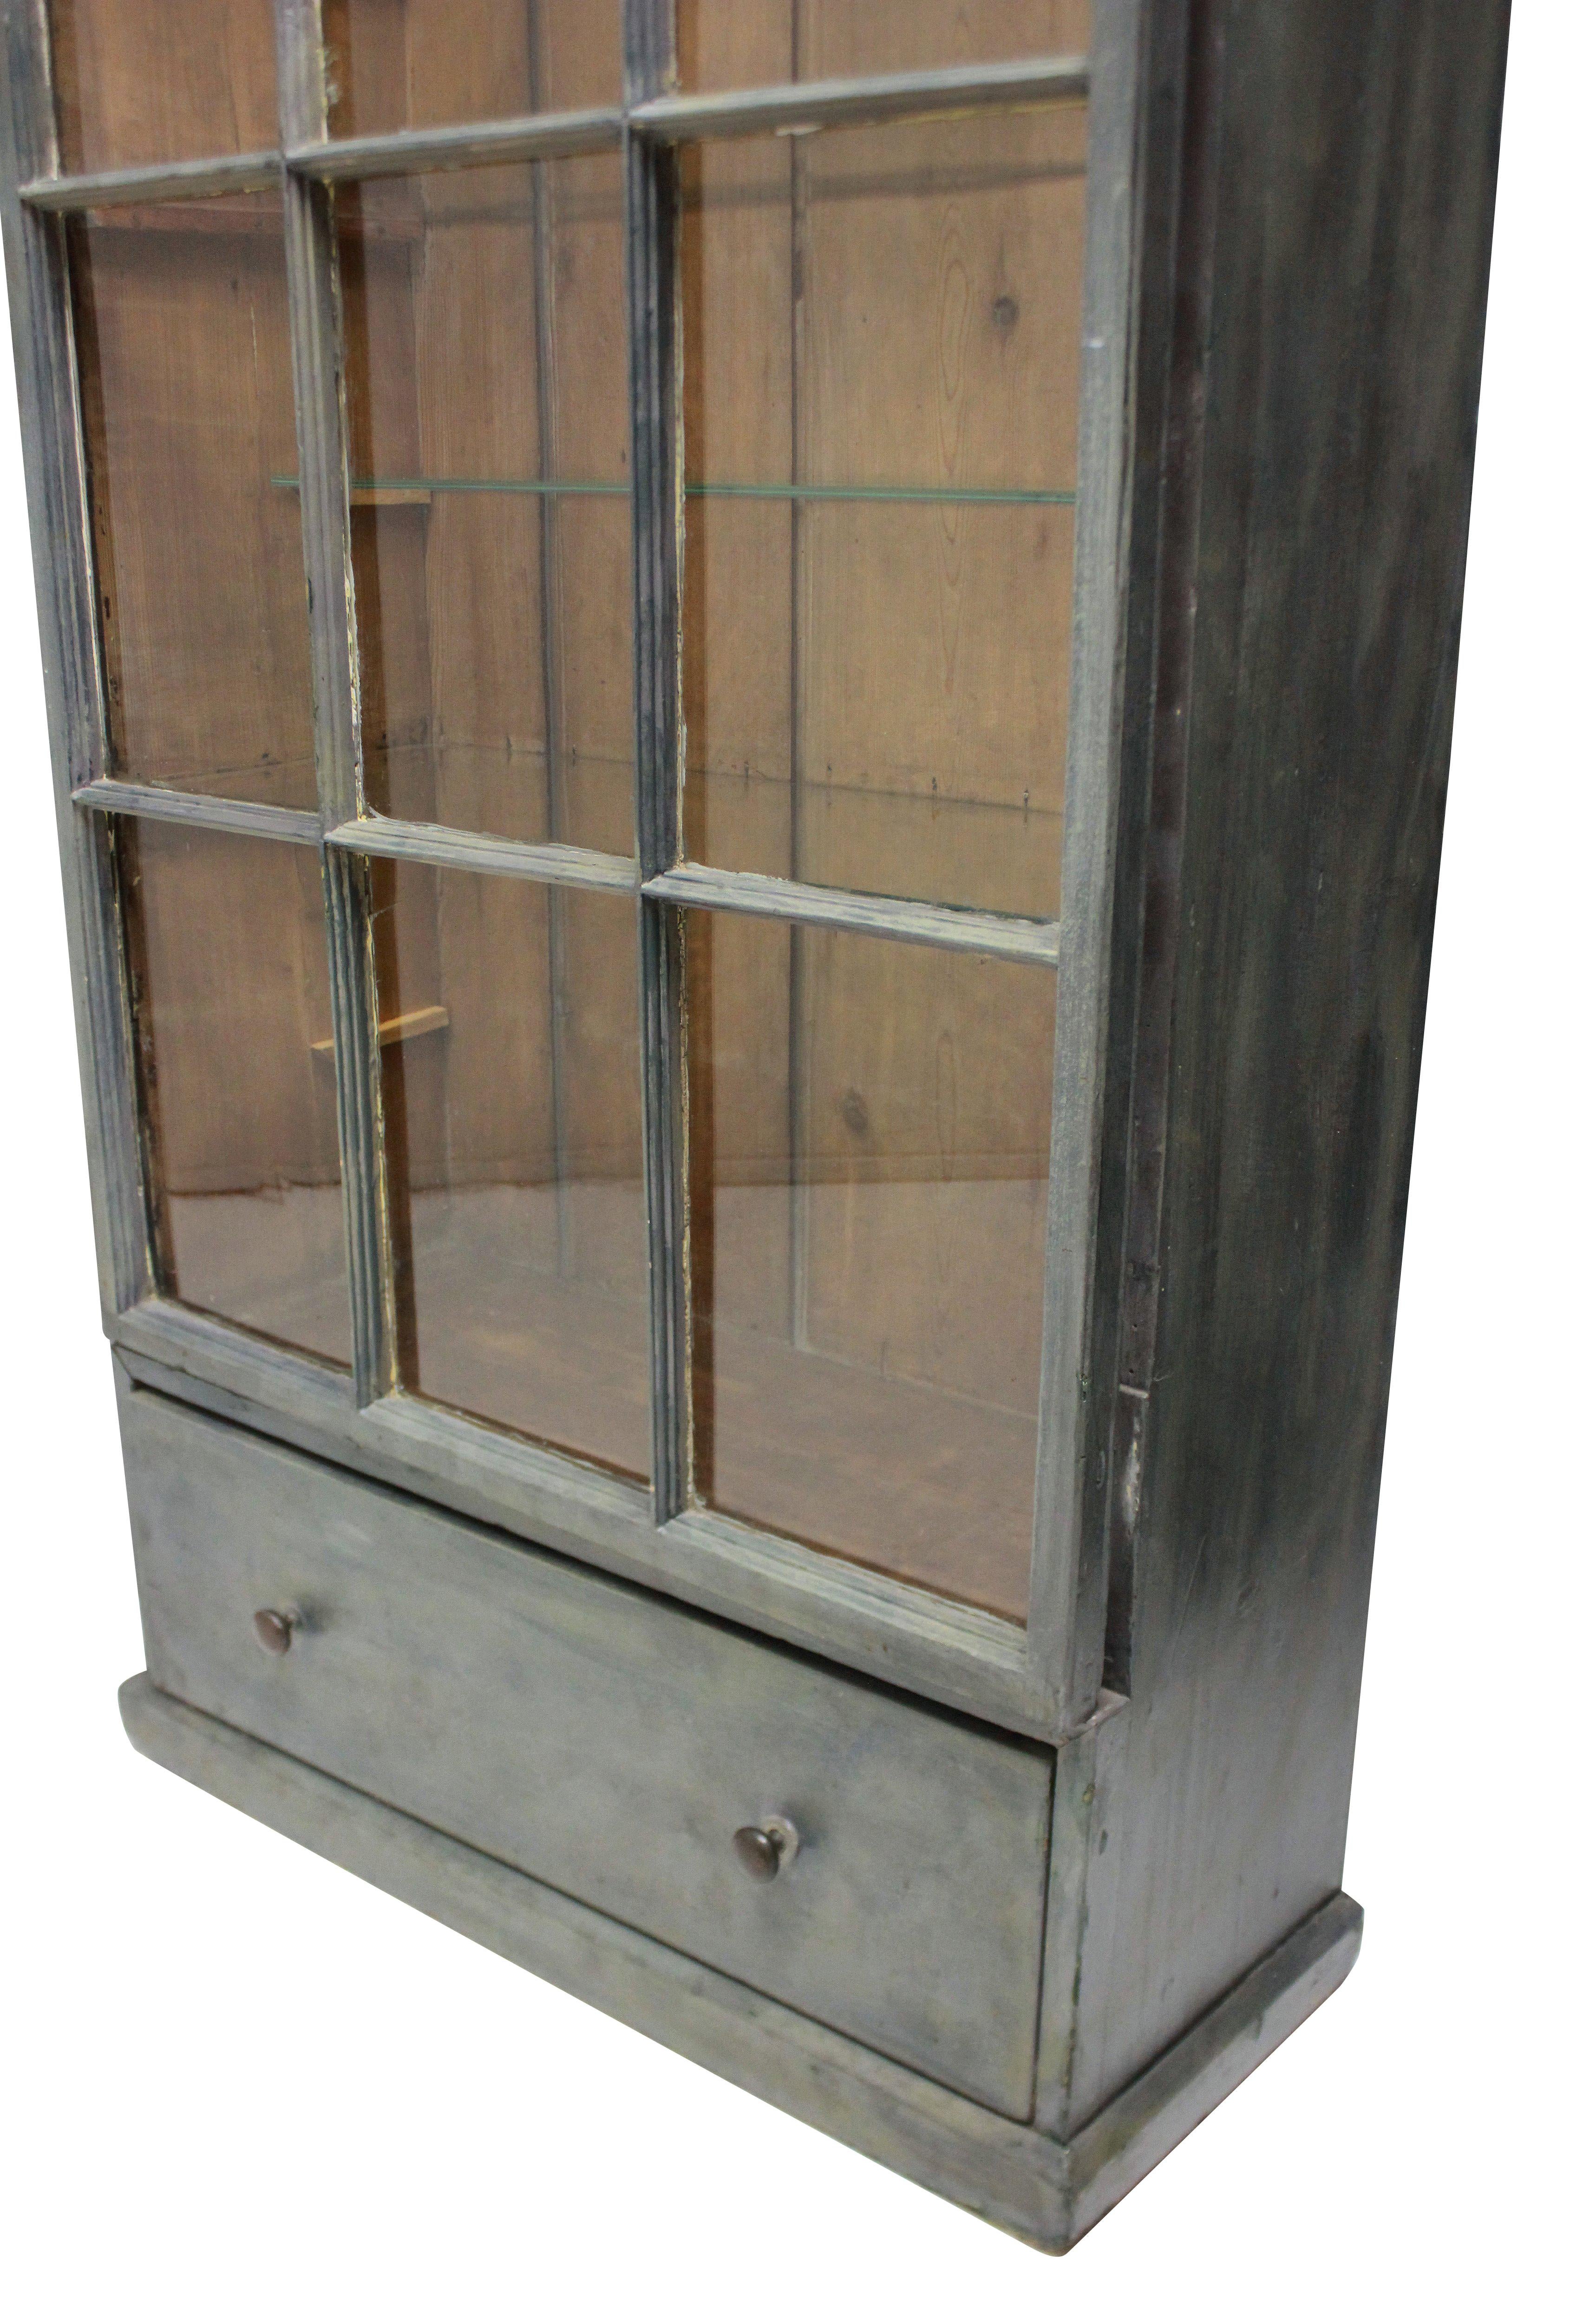 A large French painted display cabinet, with the original 19th century glazed door panels and glass shelves within.

